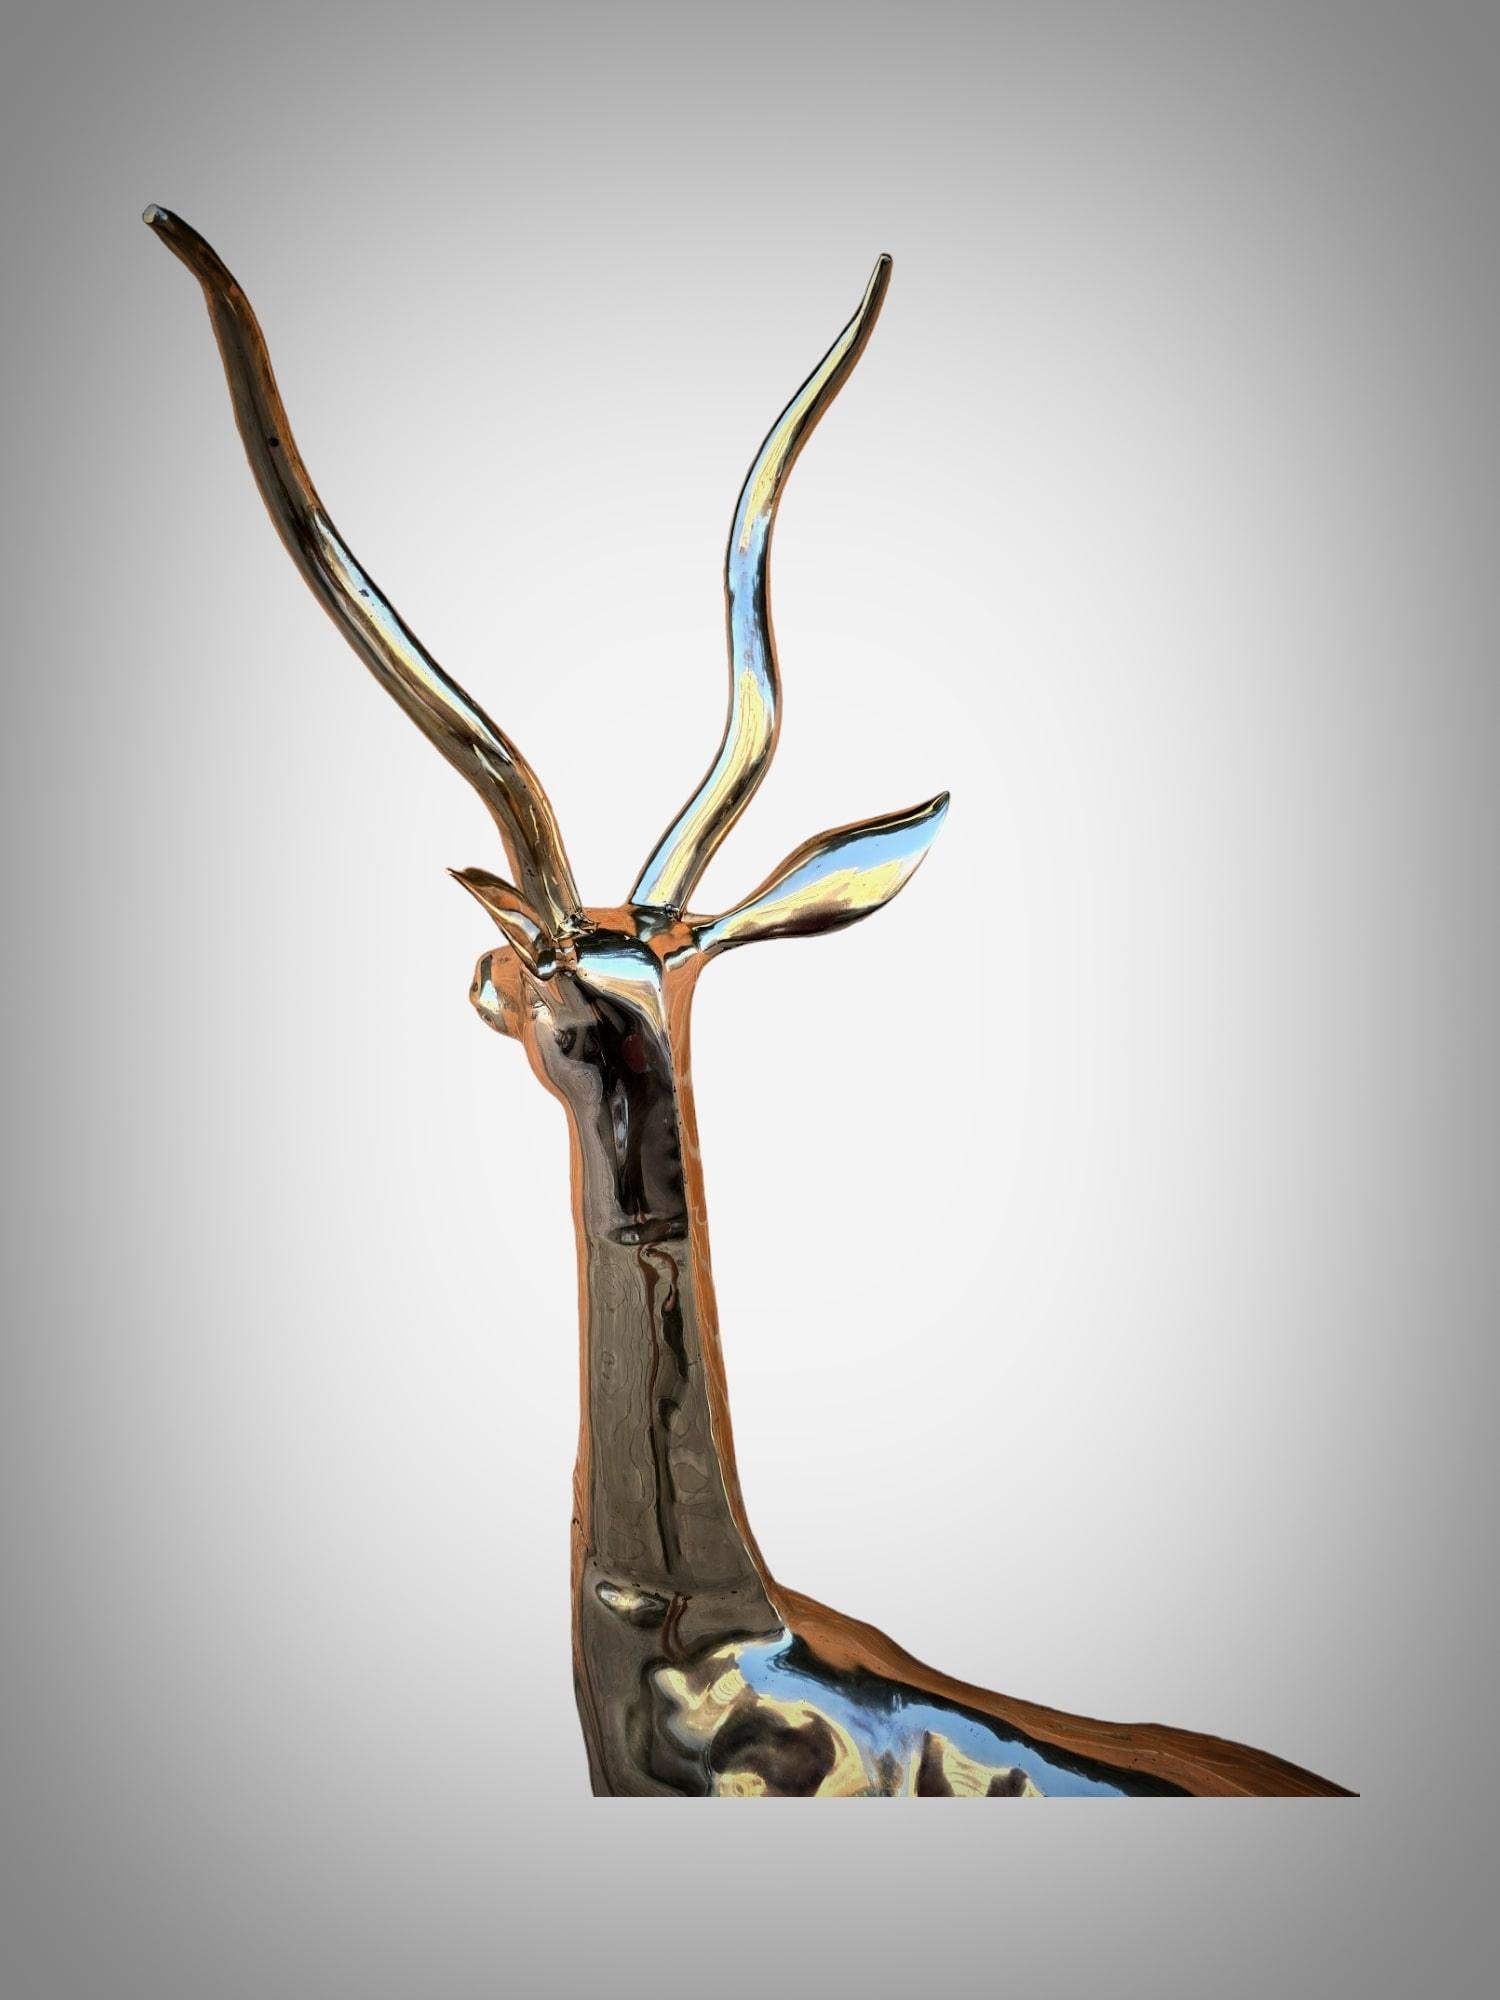 Exquisite Polished Bronze Sculpture: Lifesize Antelope from the 1950s For Sale 3